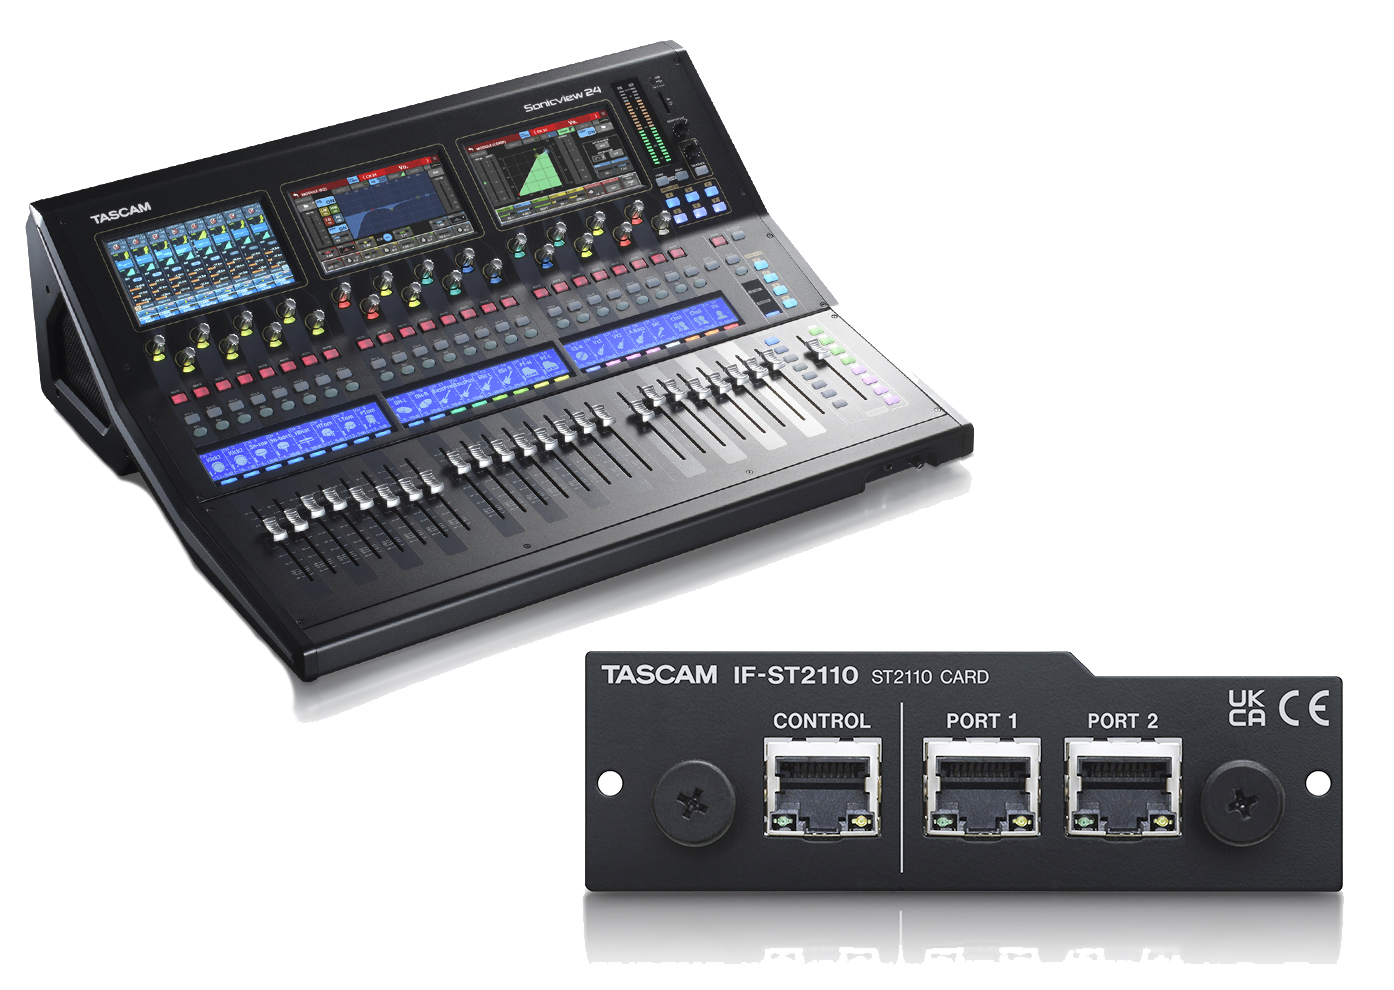 The new TASCAM IF-ST2110 expansion card adds new connectivitity to Sonicview 16XP/24XP digital consoles.